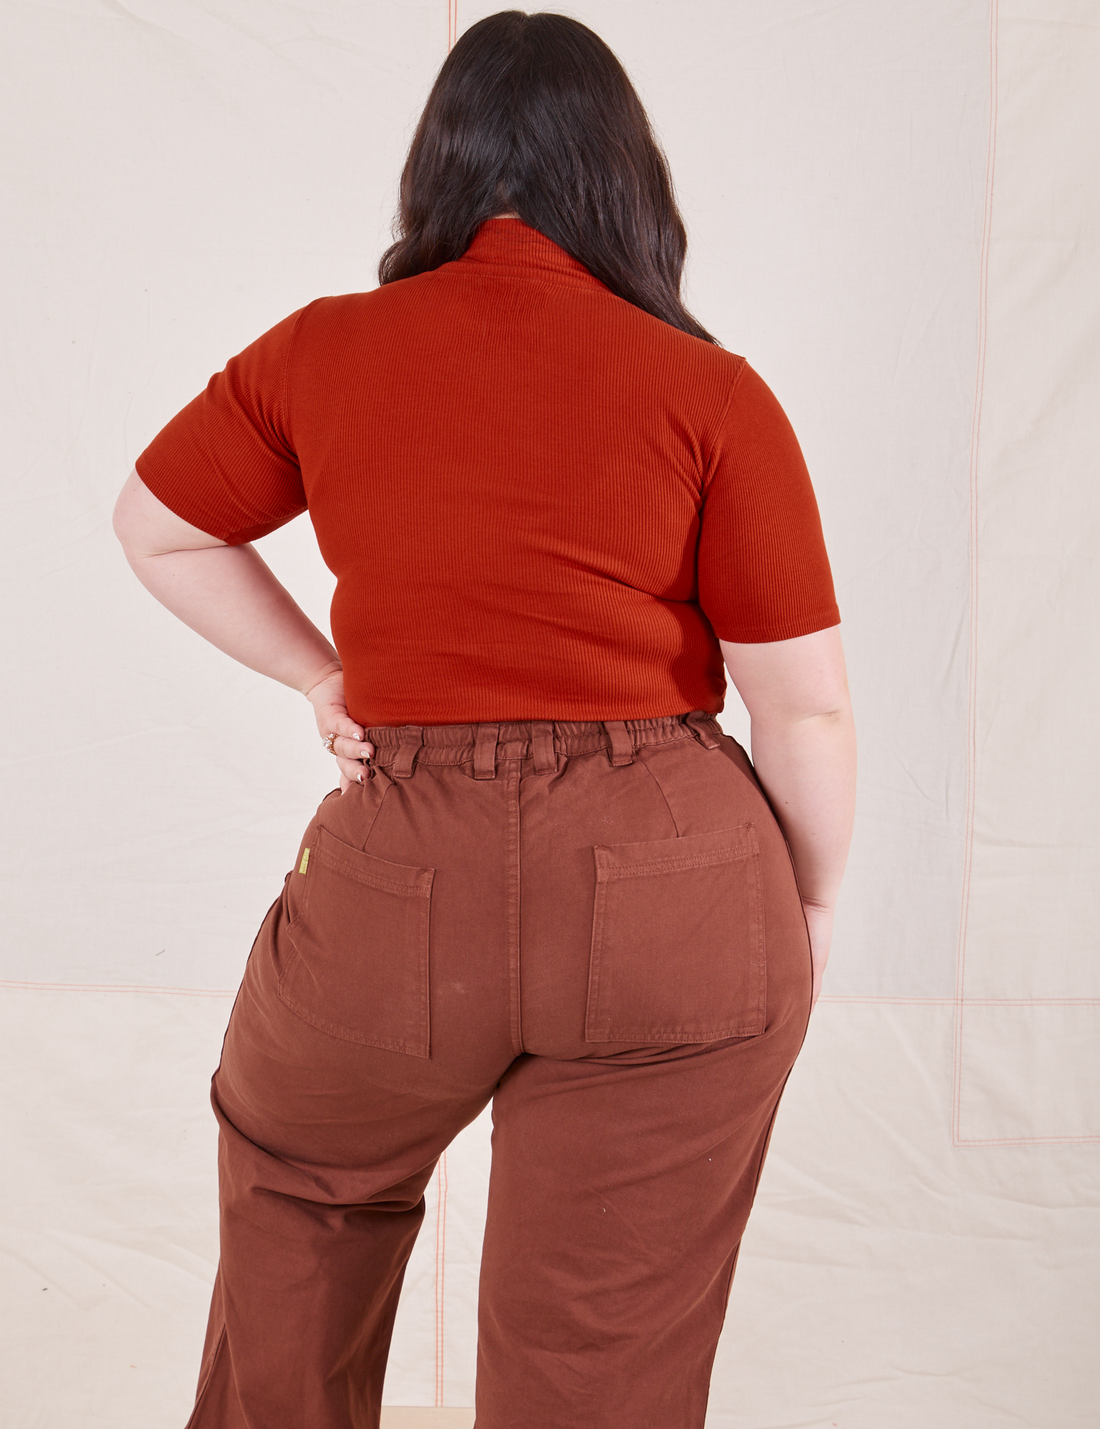 1/2 Sleeve Essential Turtleneck in Paprika back view on Ashley wearing fudgesicle brown Bell Bottoms